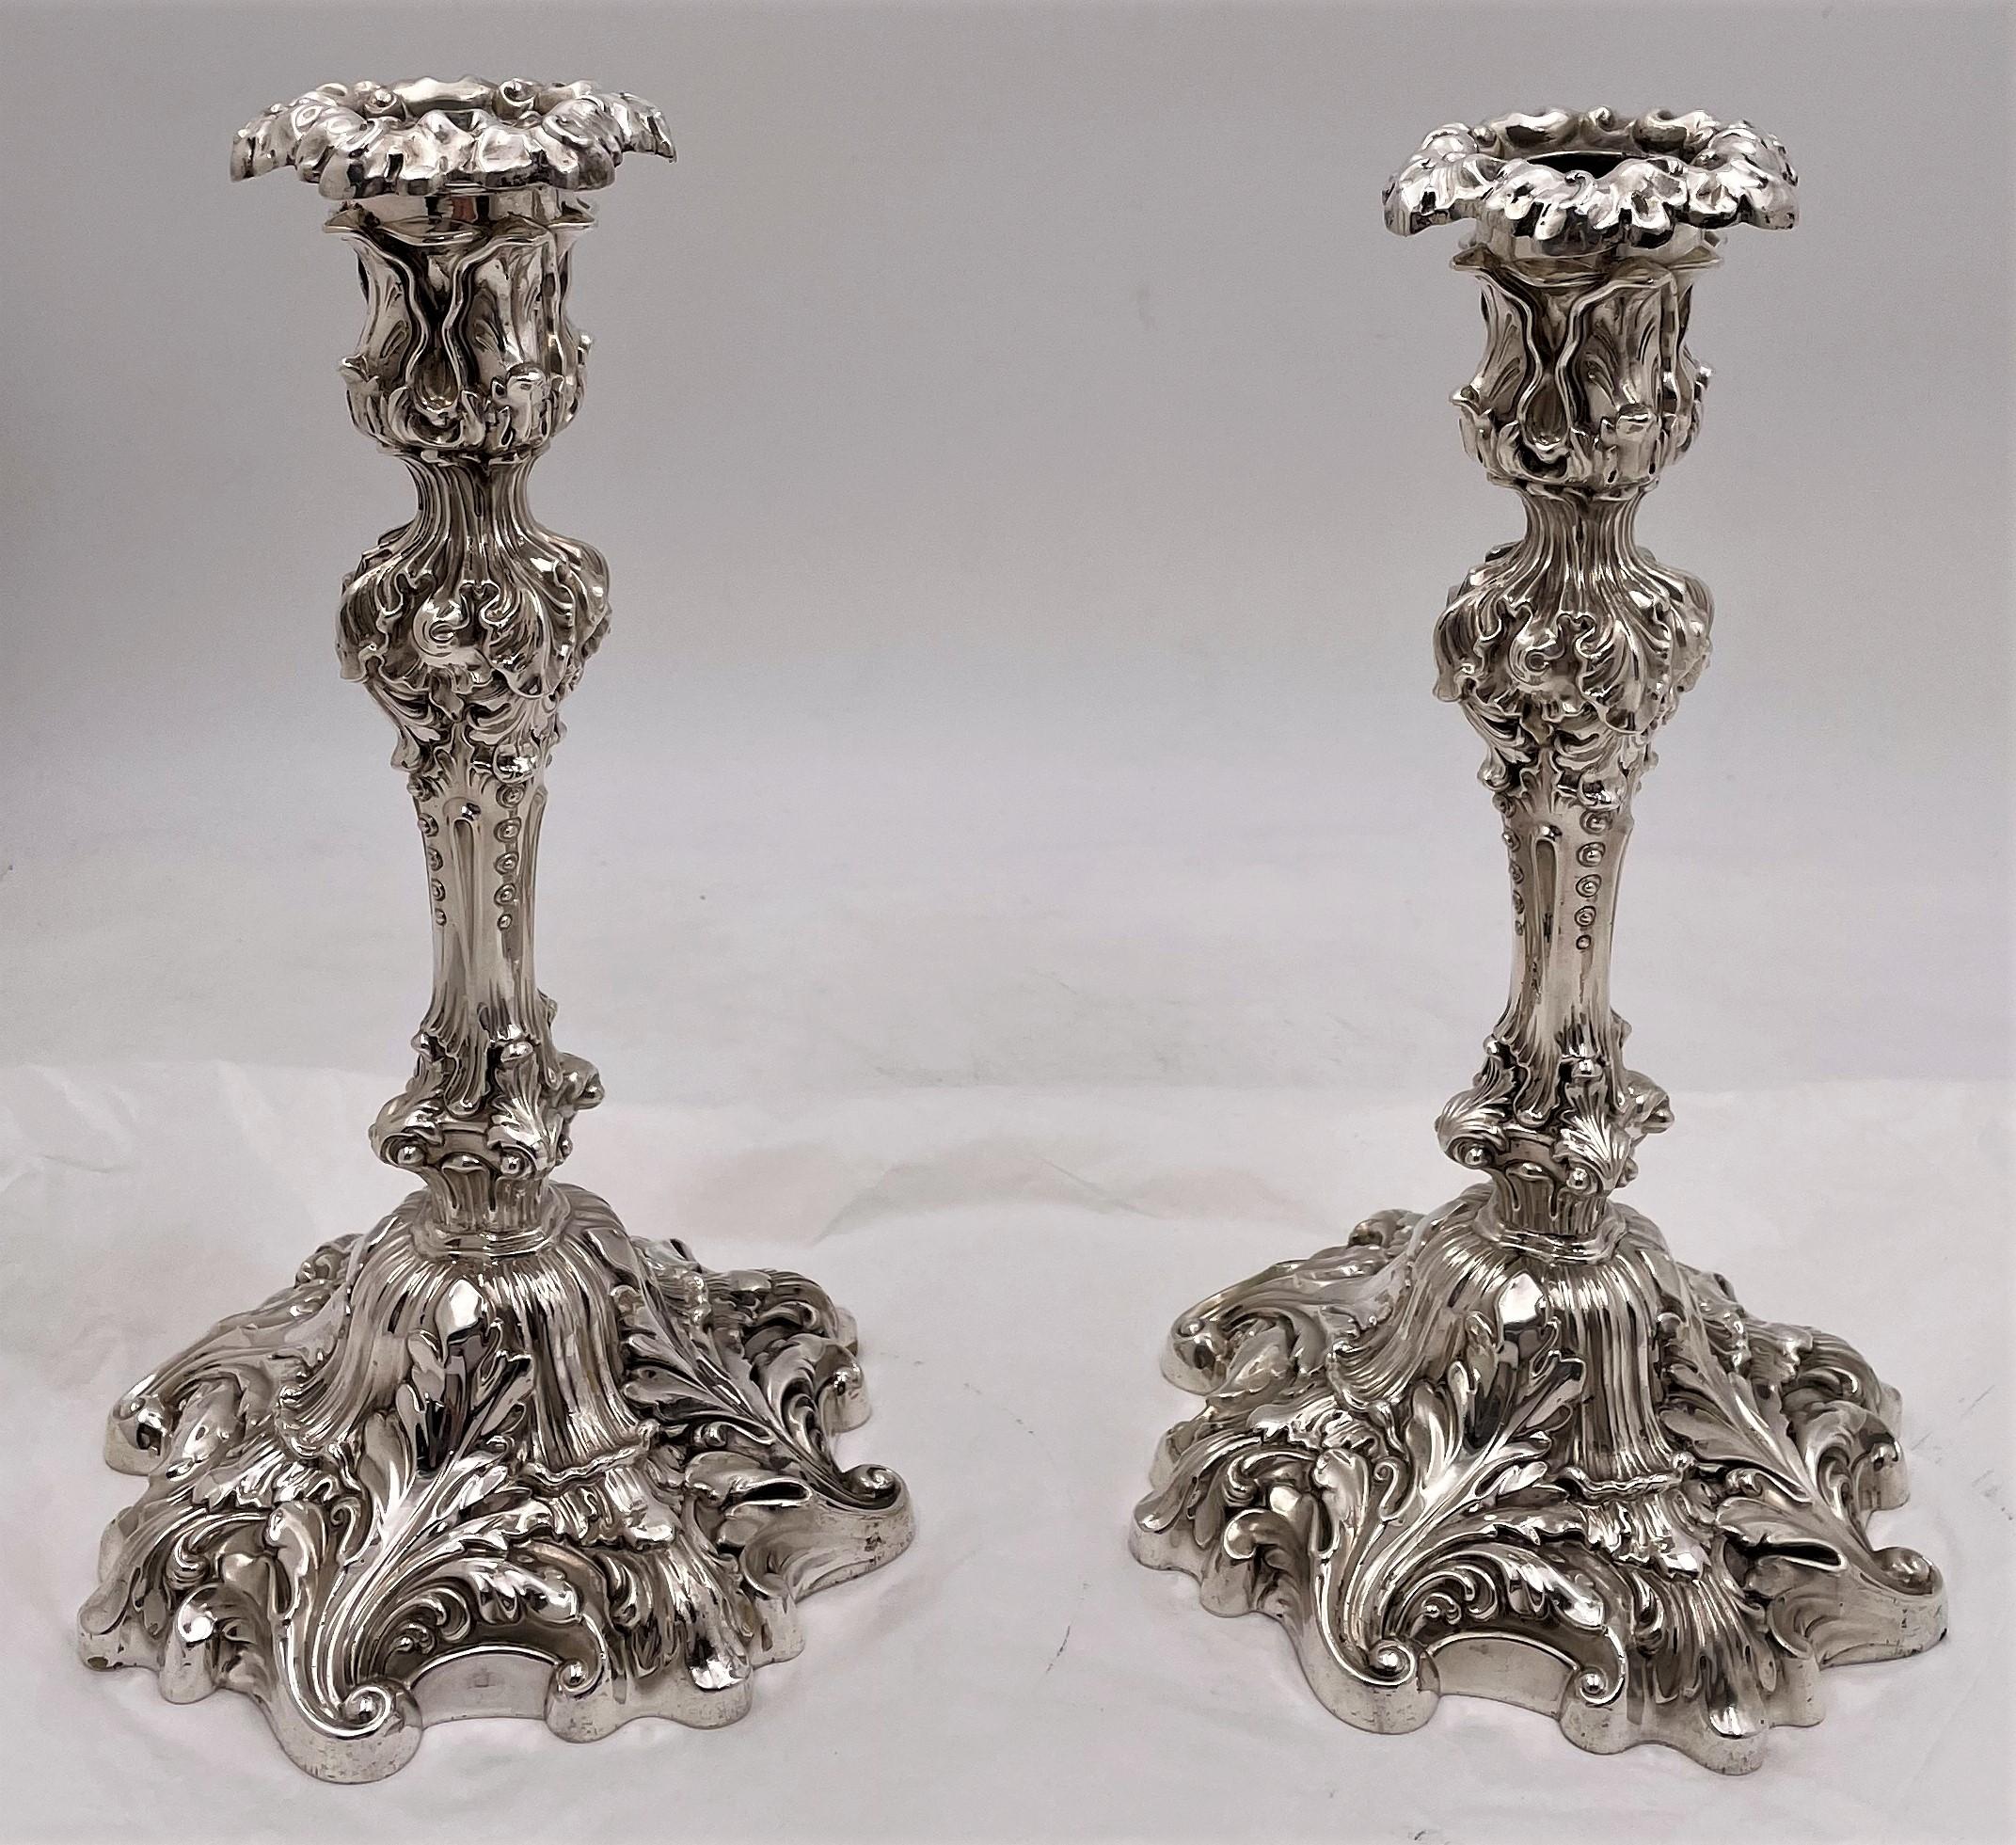 Set of 4 Howard & Co. Sterling Silver 1901 Candlesticks in Baroque Revival Style In Good Condition For Sale In New York, NY